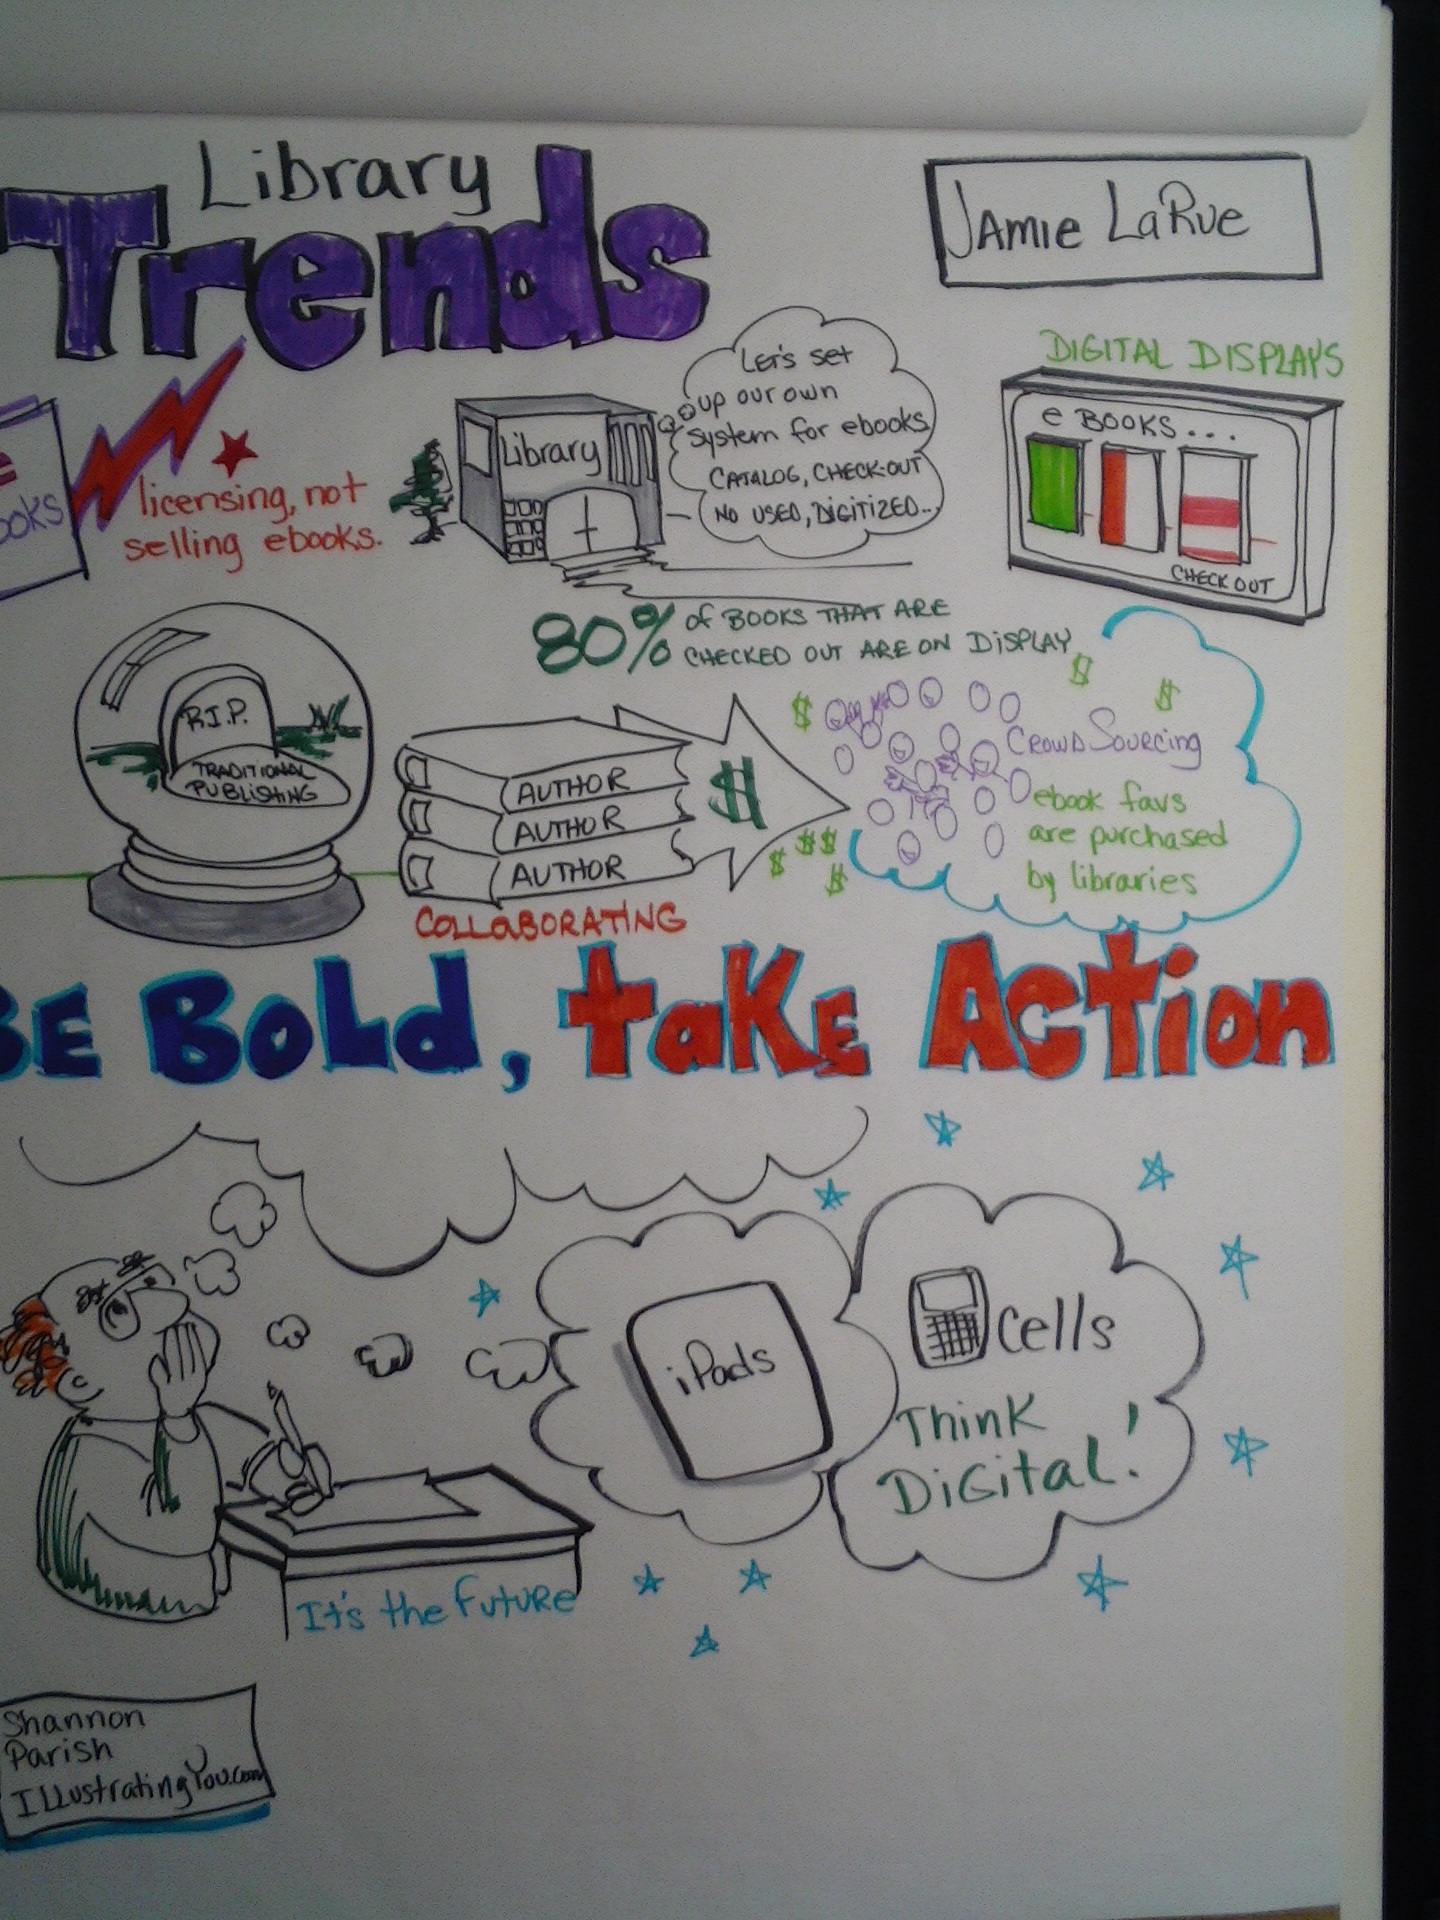 This graphic recording is is from a session regarding Library trends by Jamie LaRue